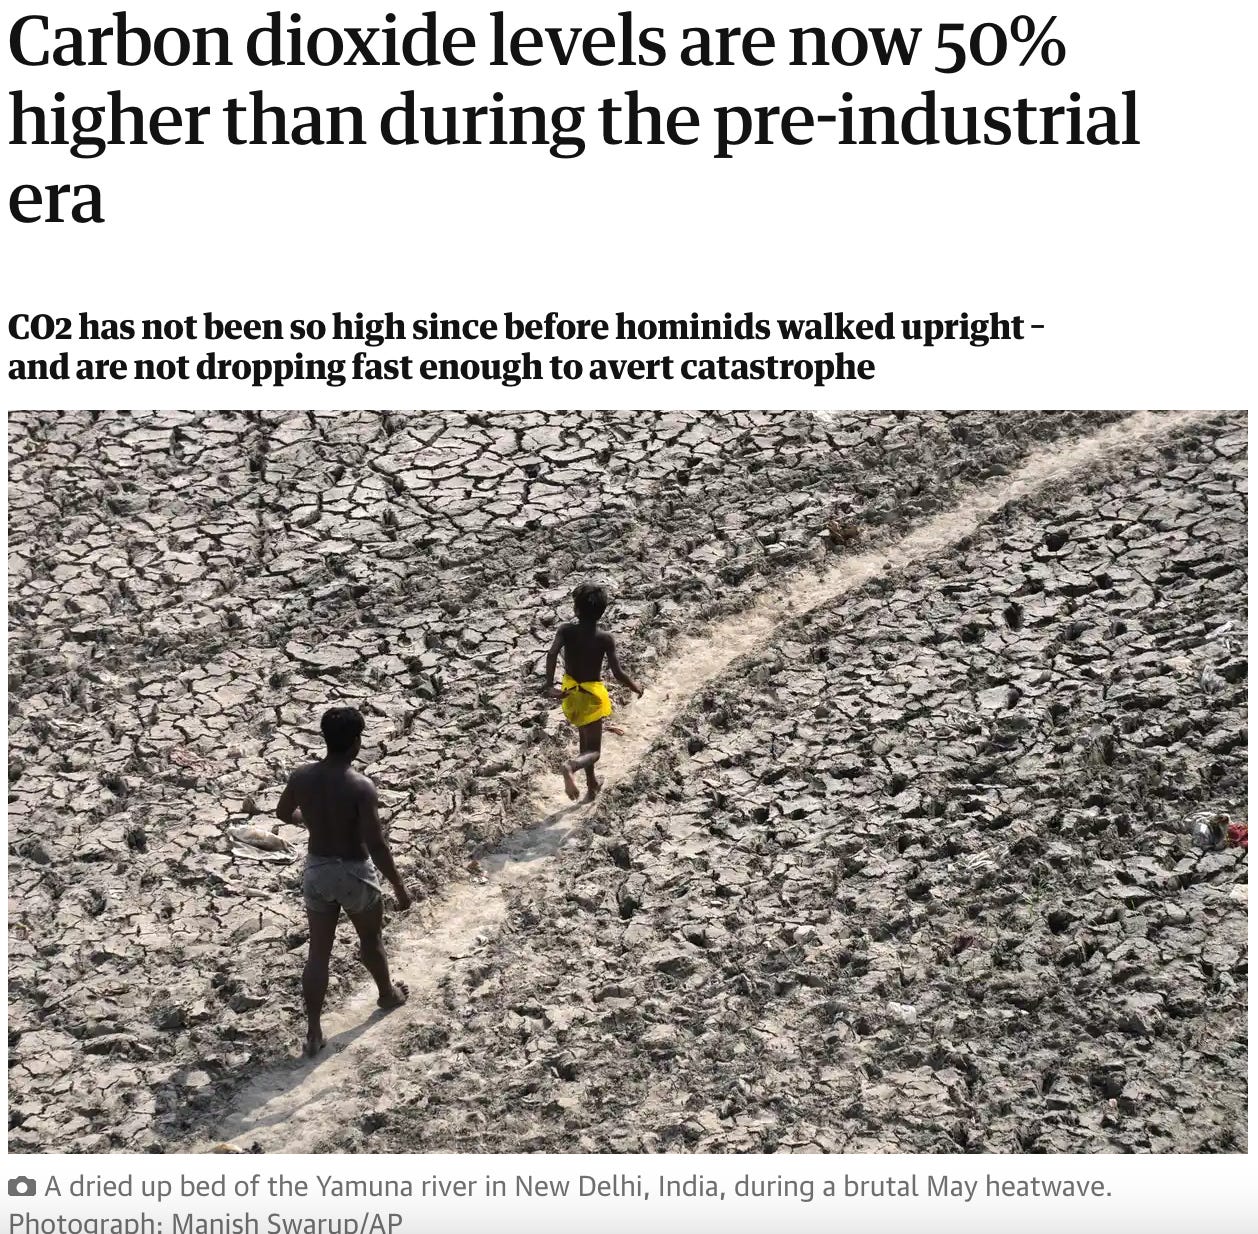 A screenshot from The Guardian with the headline "Carbon dioxide levels are now 50% higher than during the pre-industrial era"